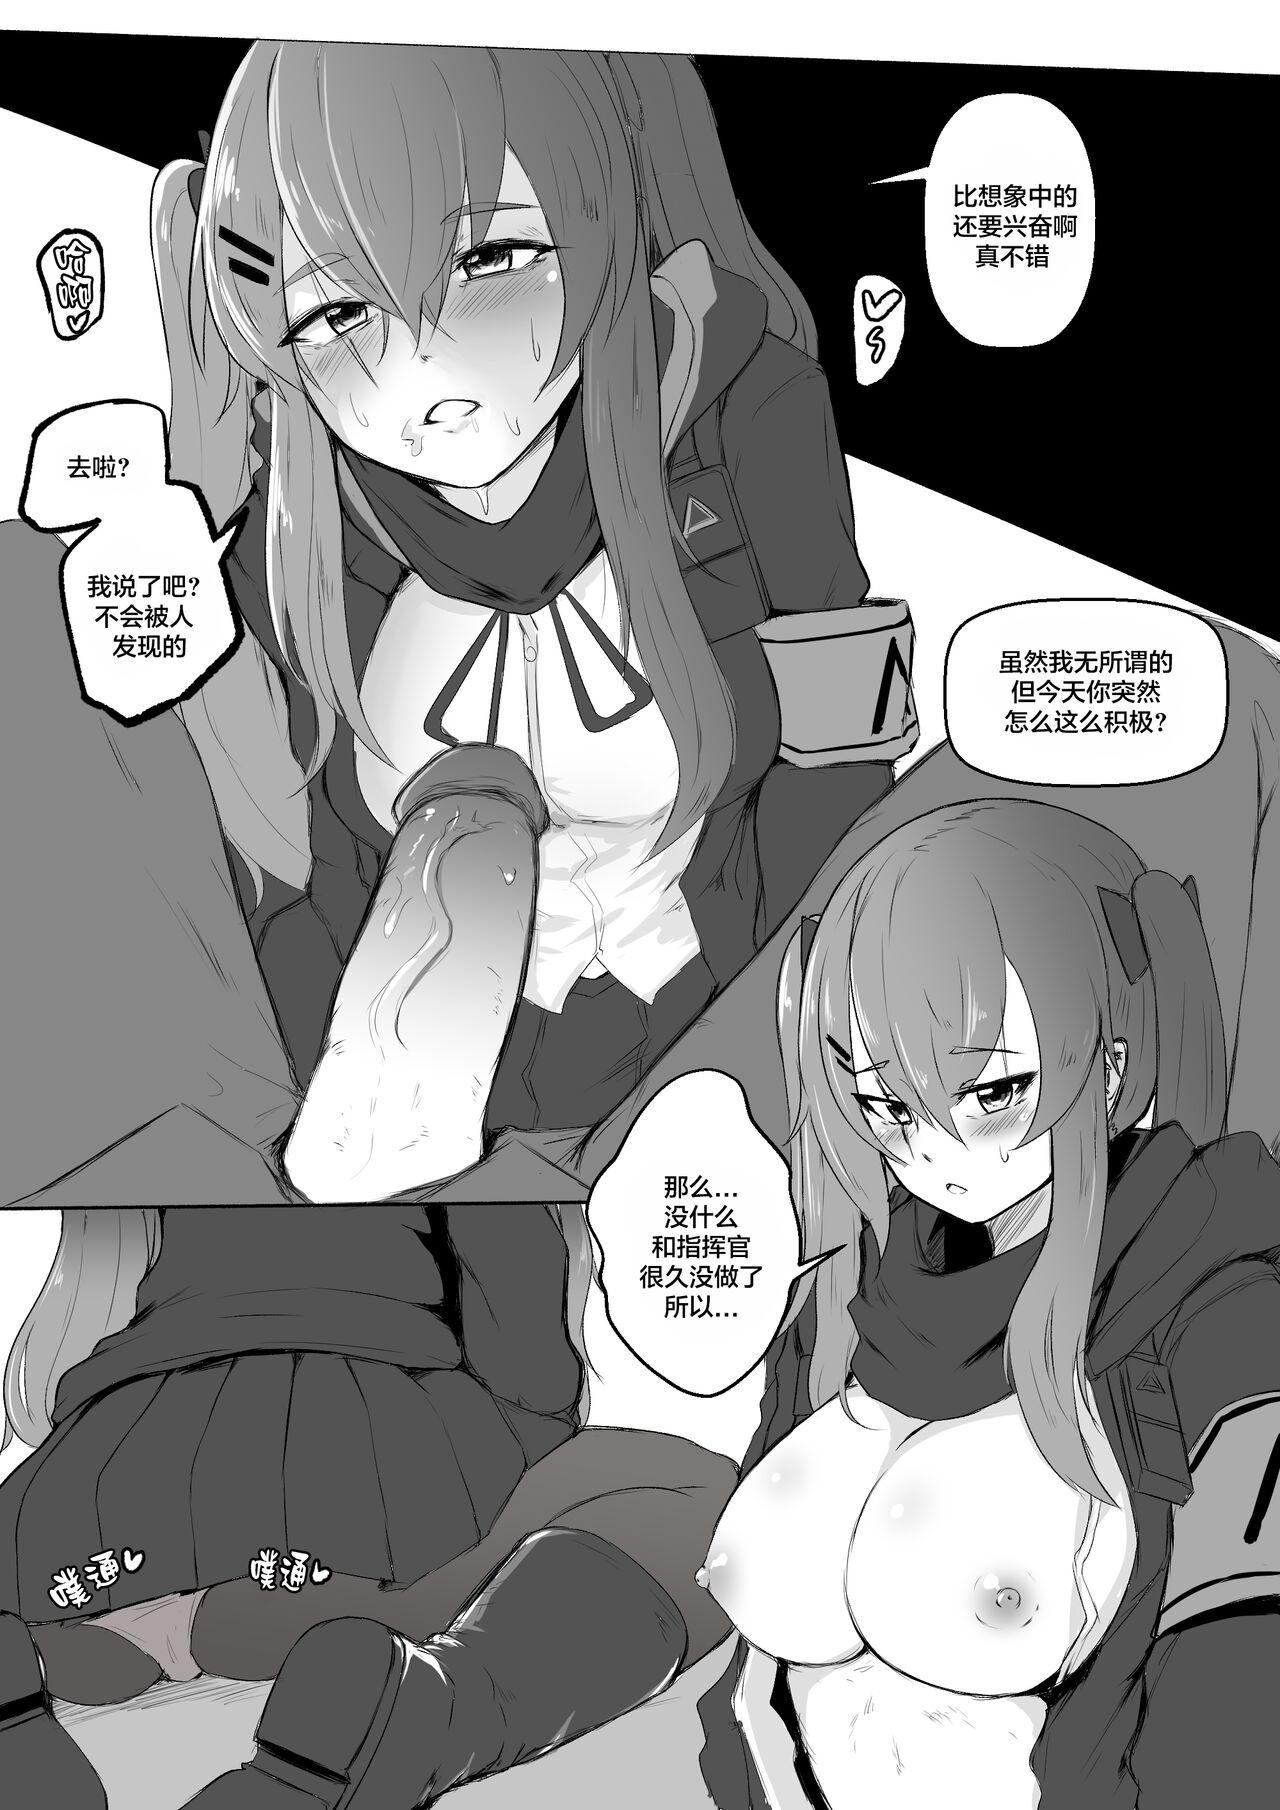 Leche UMP9, UMP45 - Girls frontline Spooning - Page 3